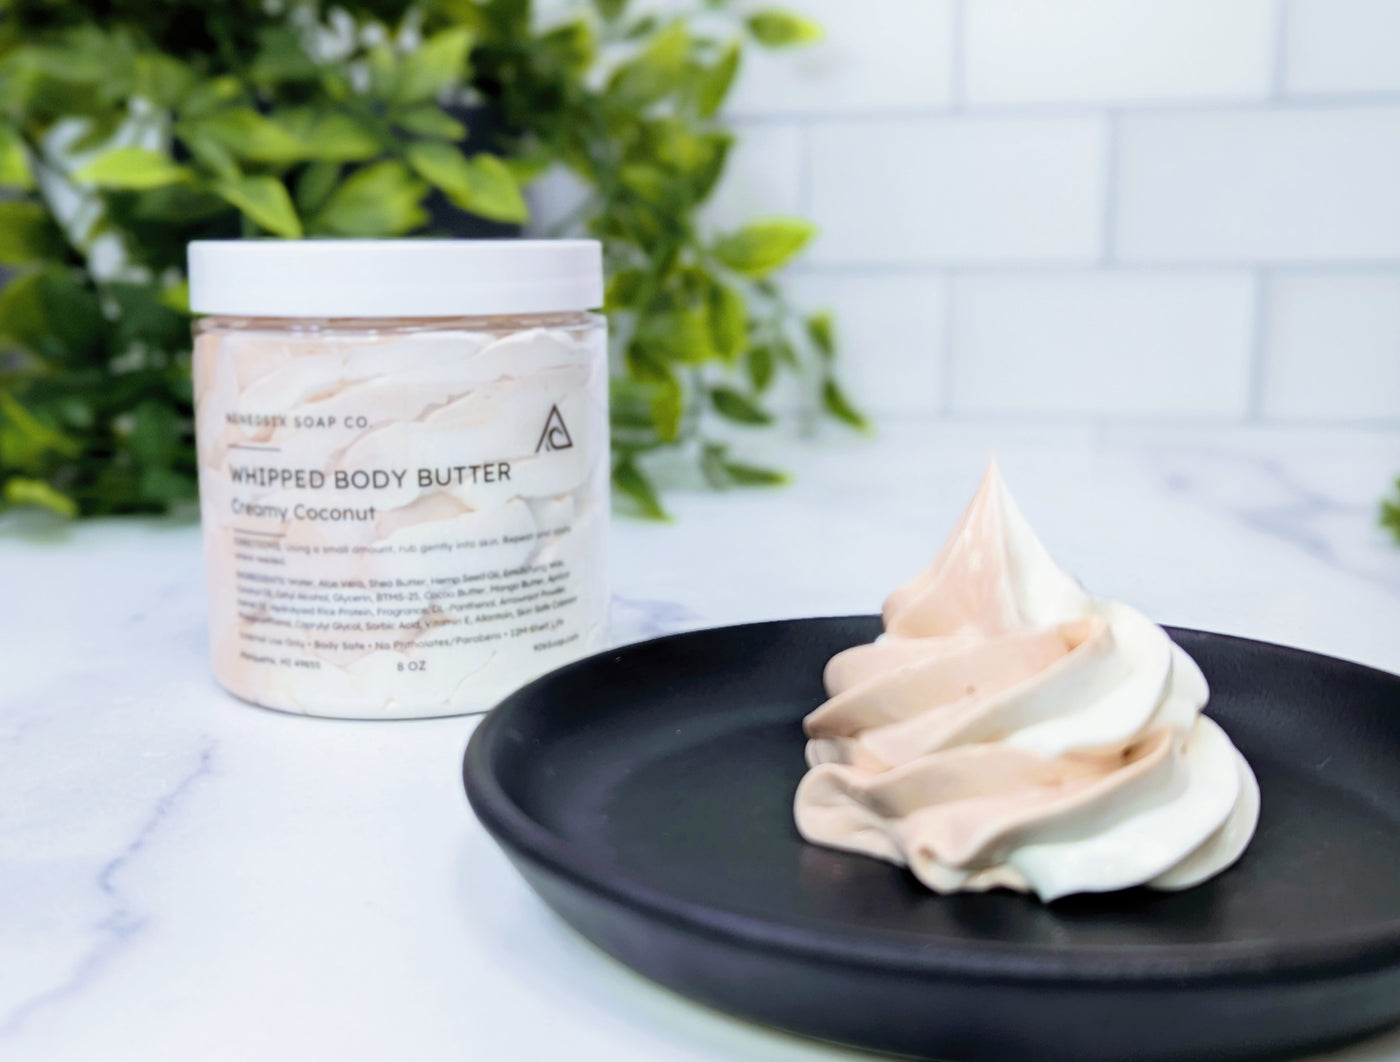 Whipped Body Butter - Creamy Coconut